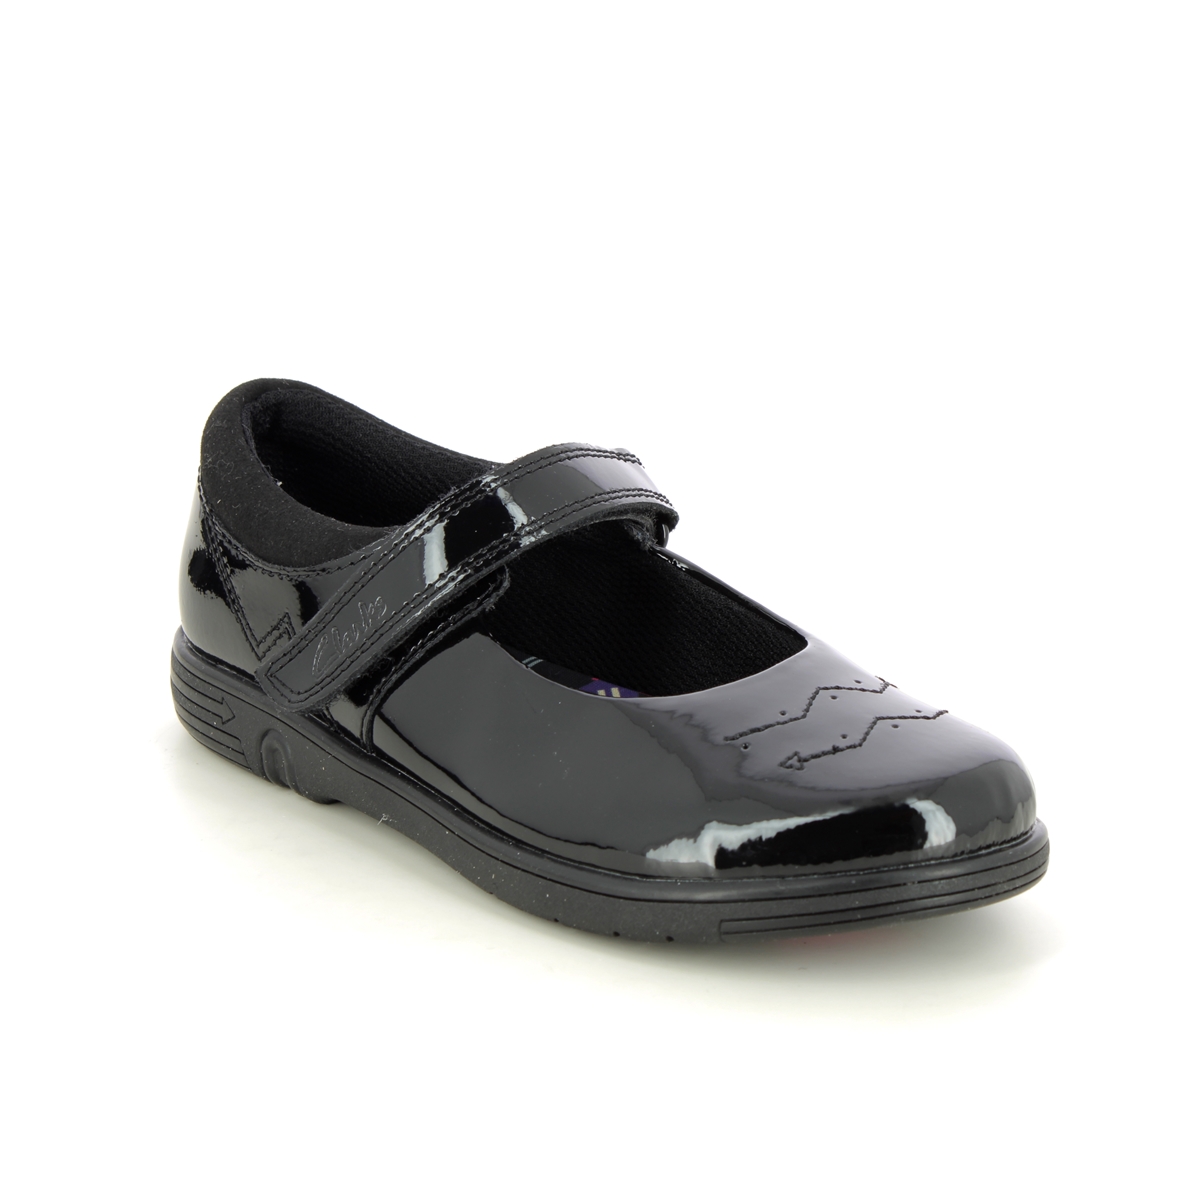 Clarks Jazzy Jig K Mary Jane Black Patent Kids Girls School Shoes 753086F In Size 11 In Plain Black Patent F Width Fitting Regular Fit For School For